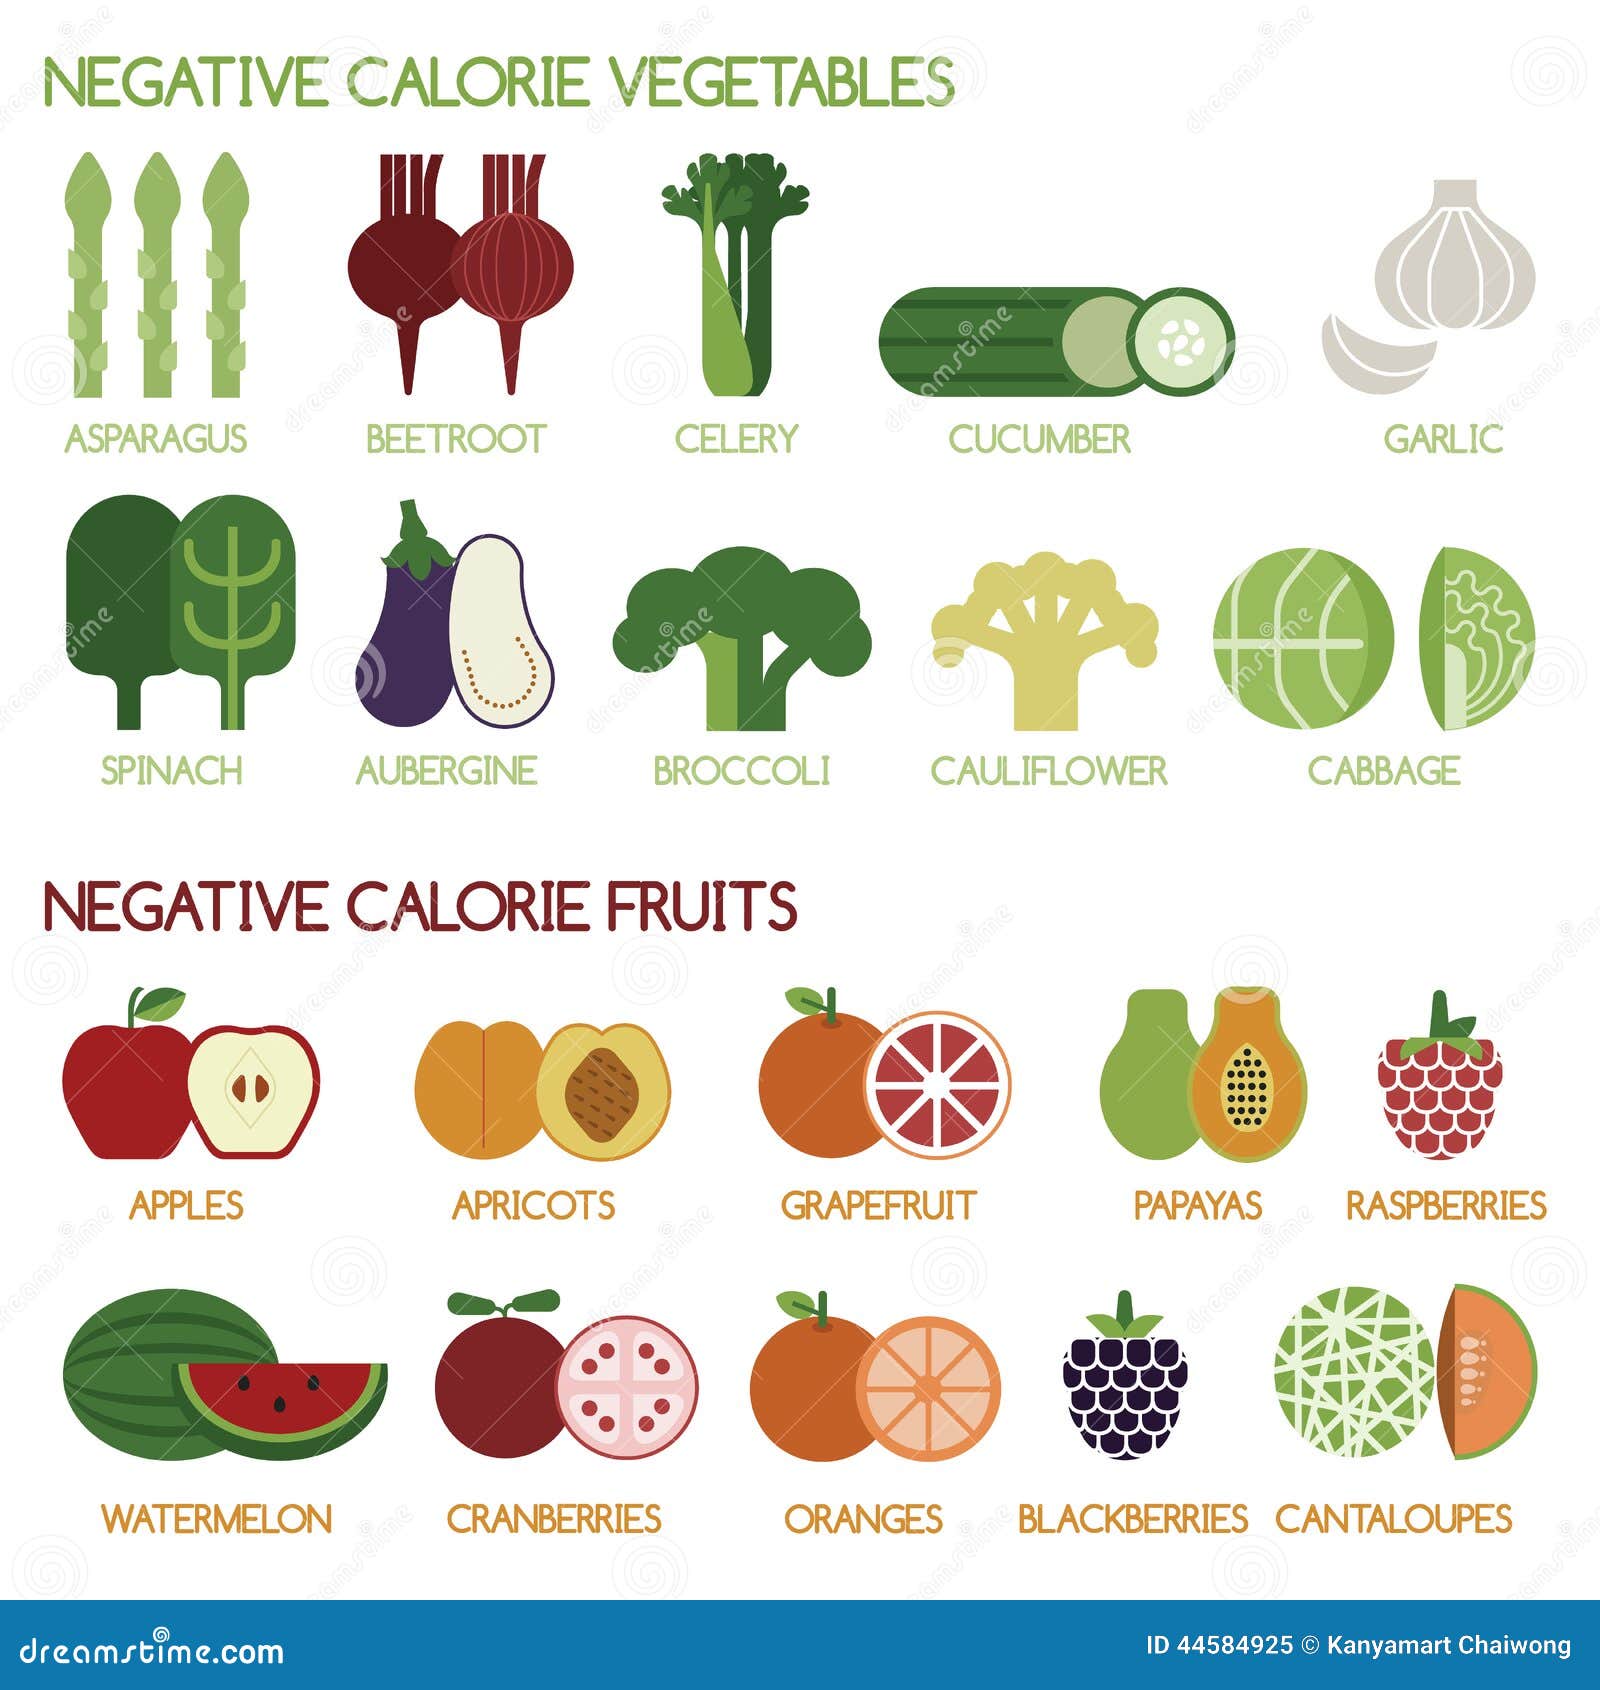 negative calorie vegetables and fruits